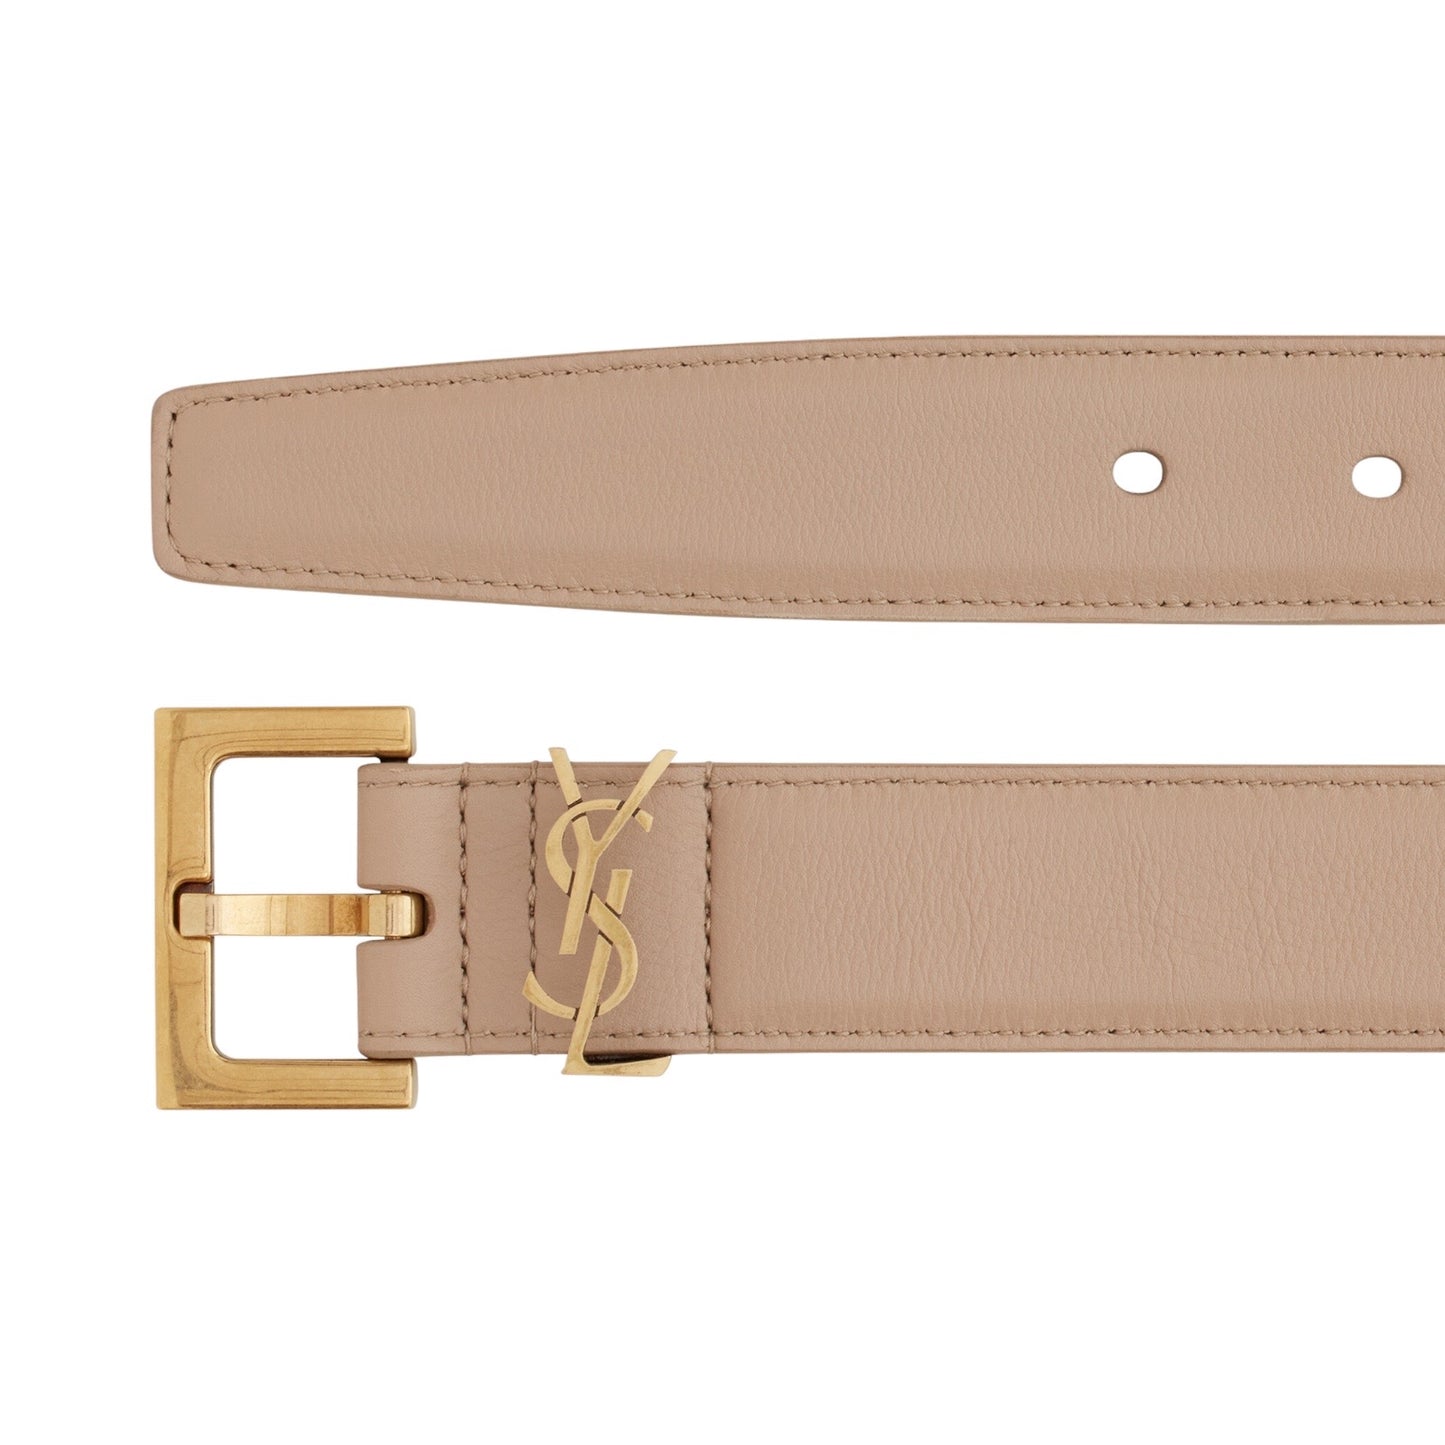 Saint Laurent Cassandre Belt with Square Buckle in Shiny Box Leather